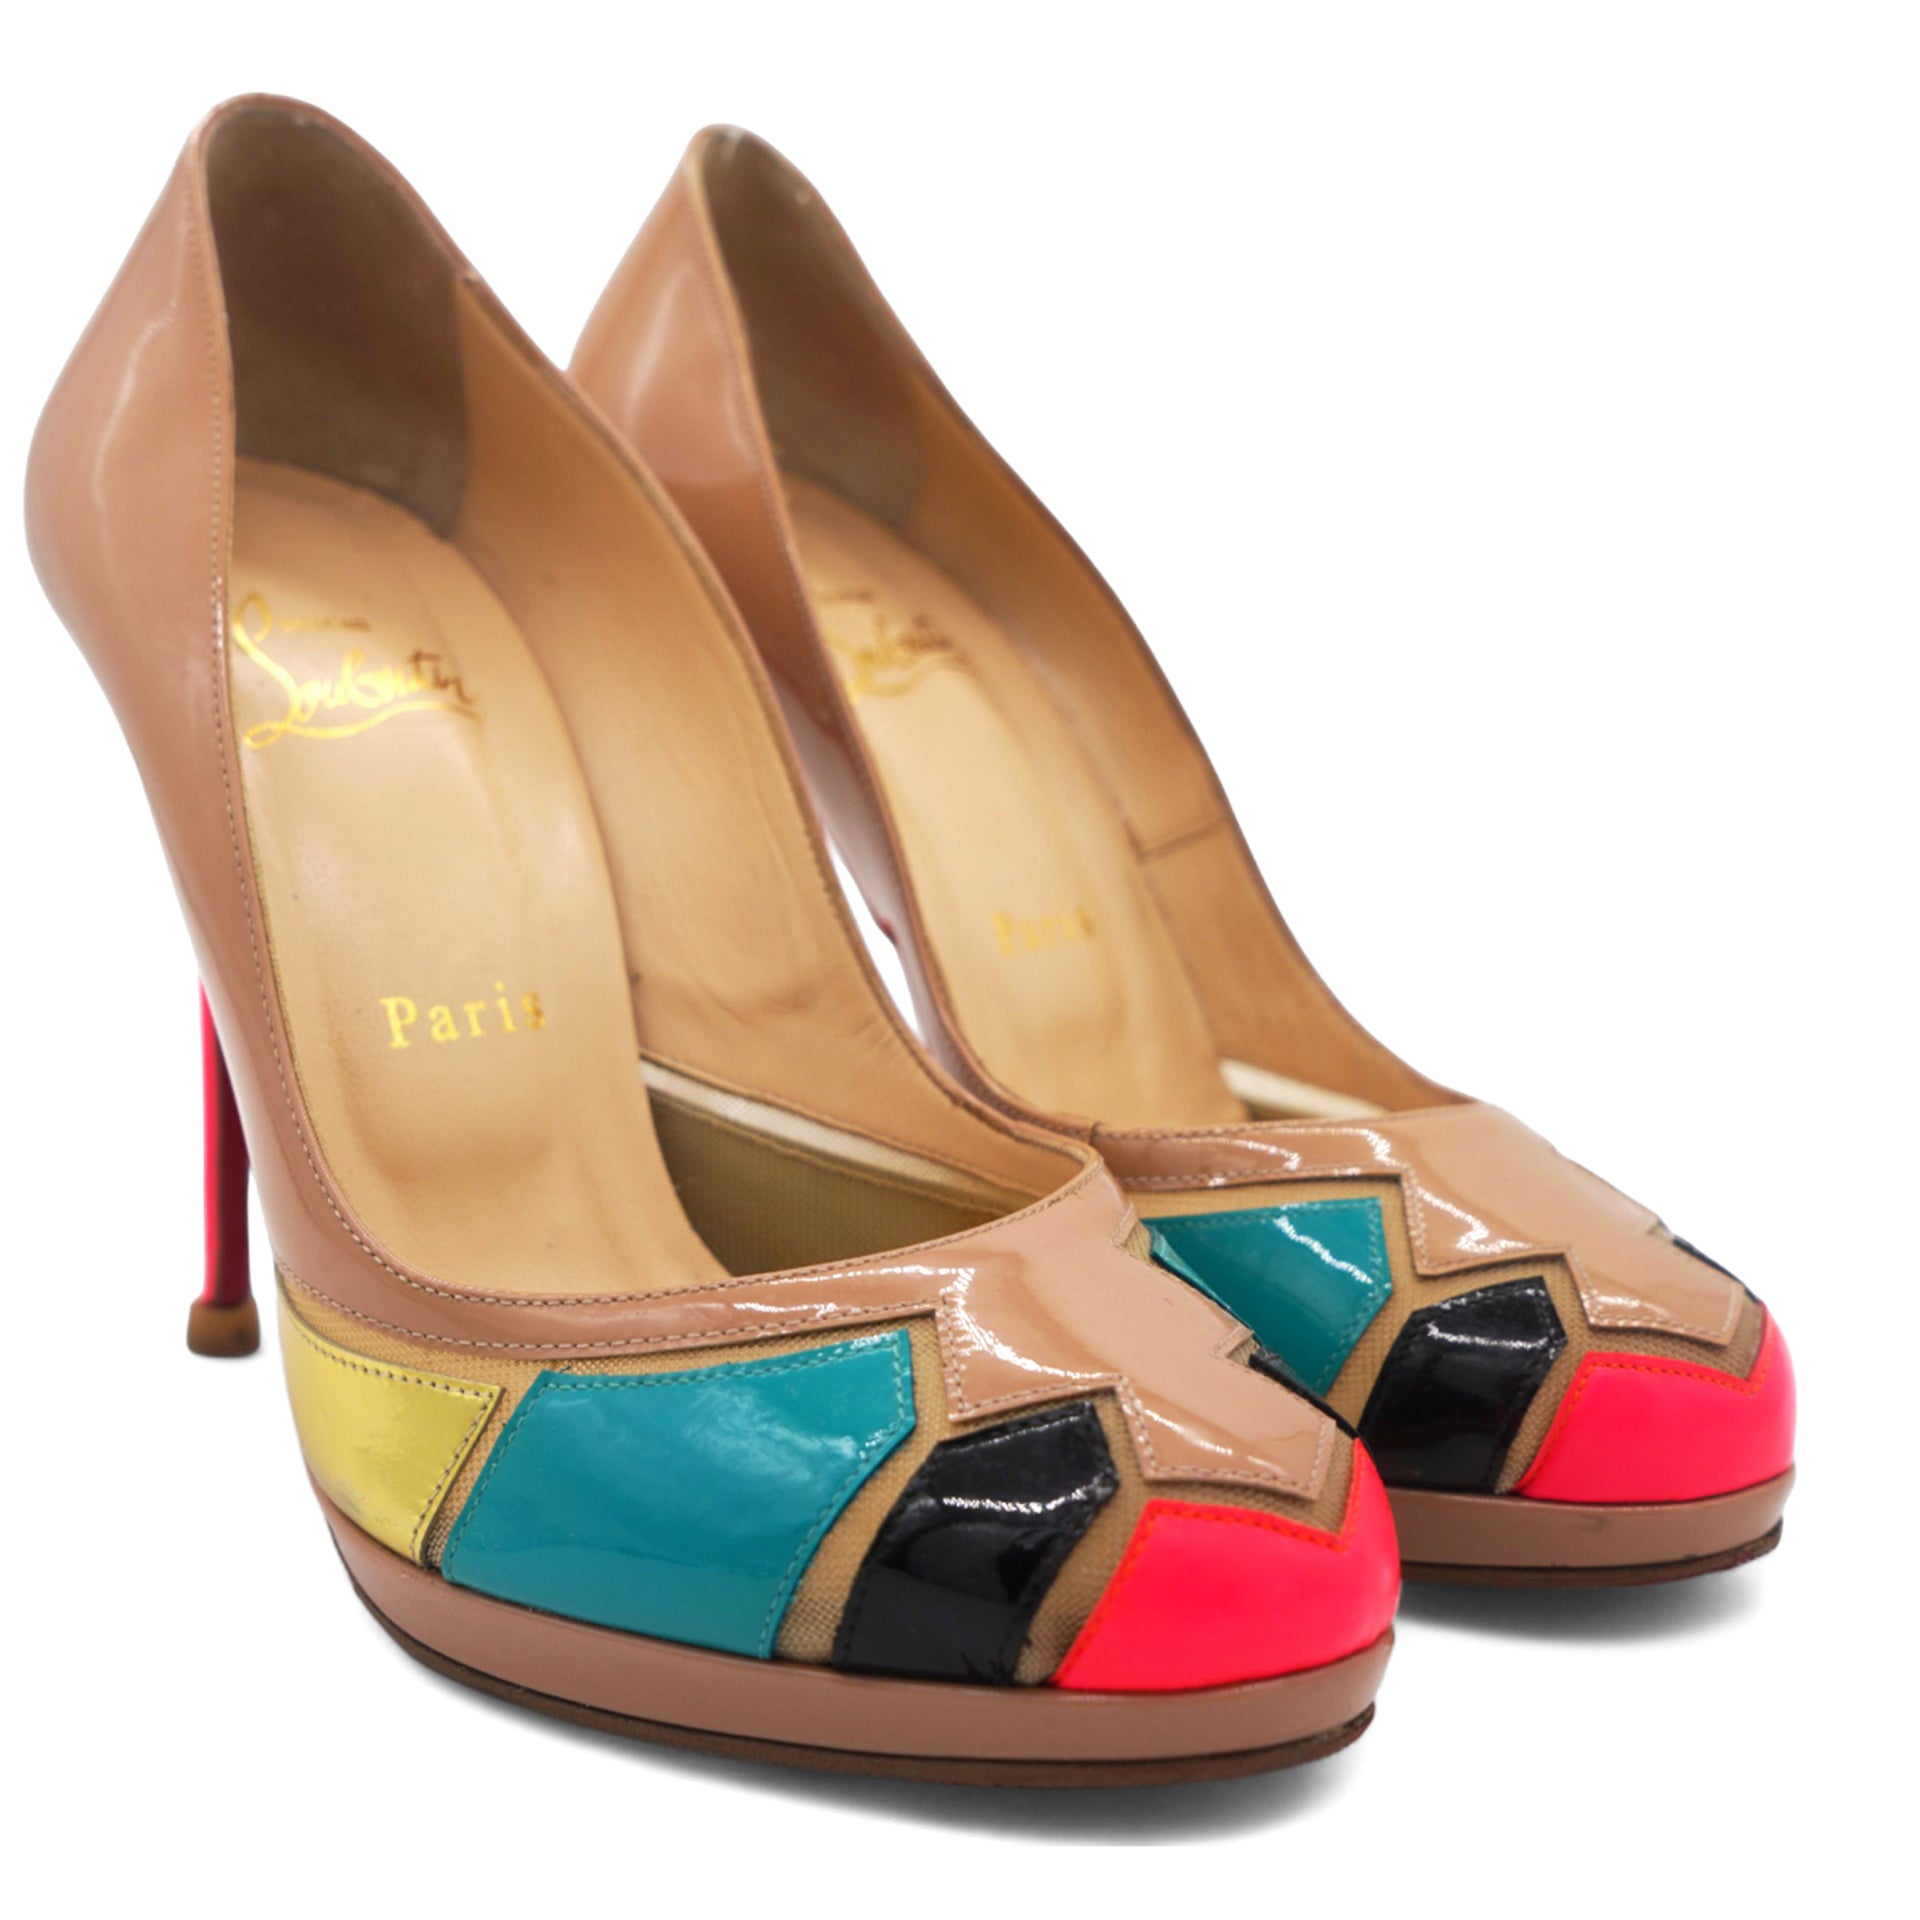 Multicolor Patchwork Patent Leather Astrogirl Pumps 37